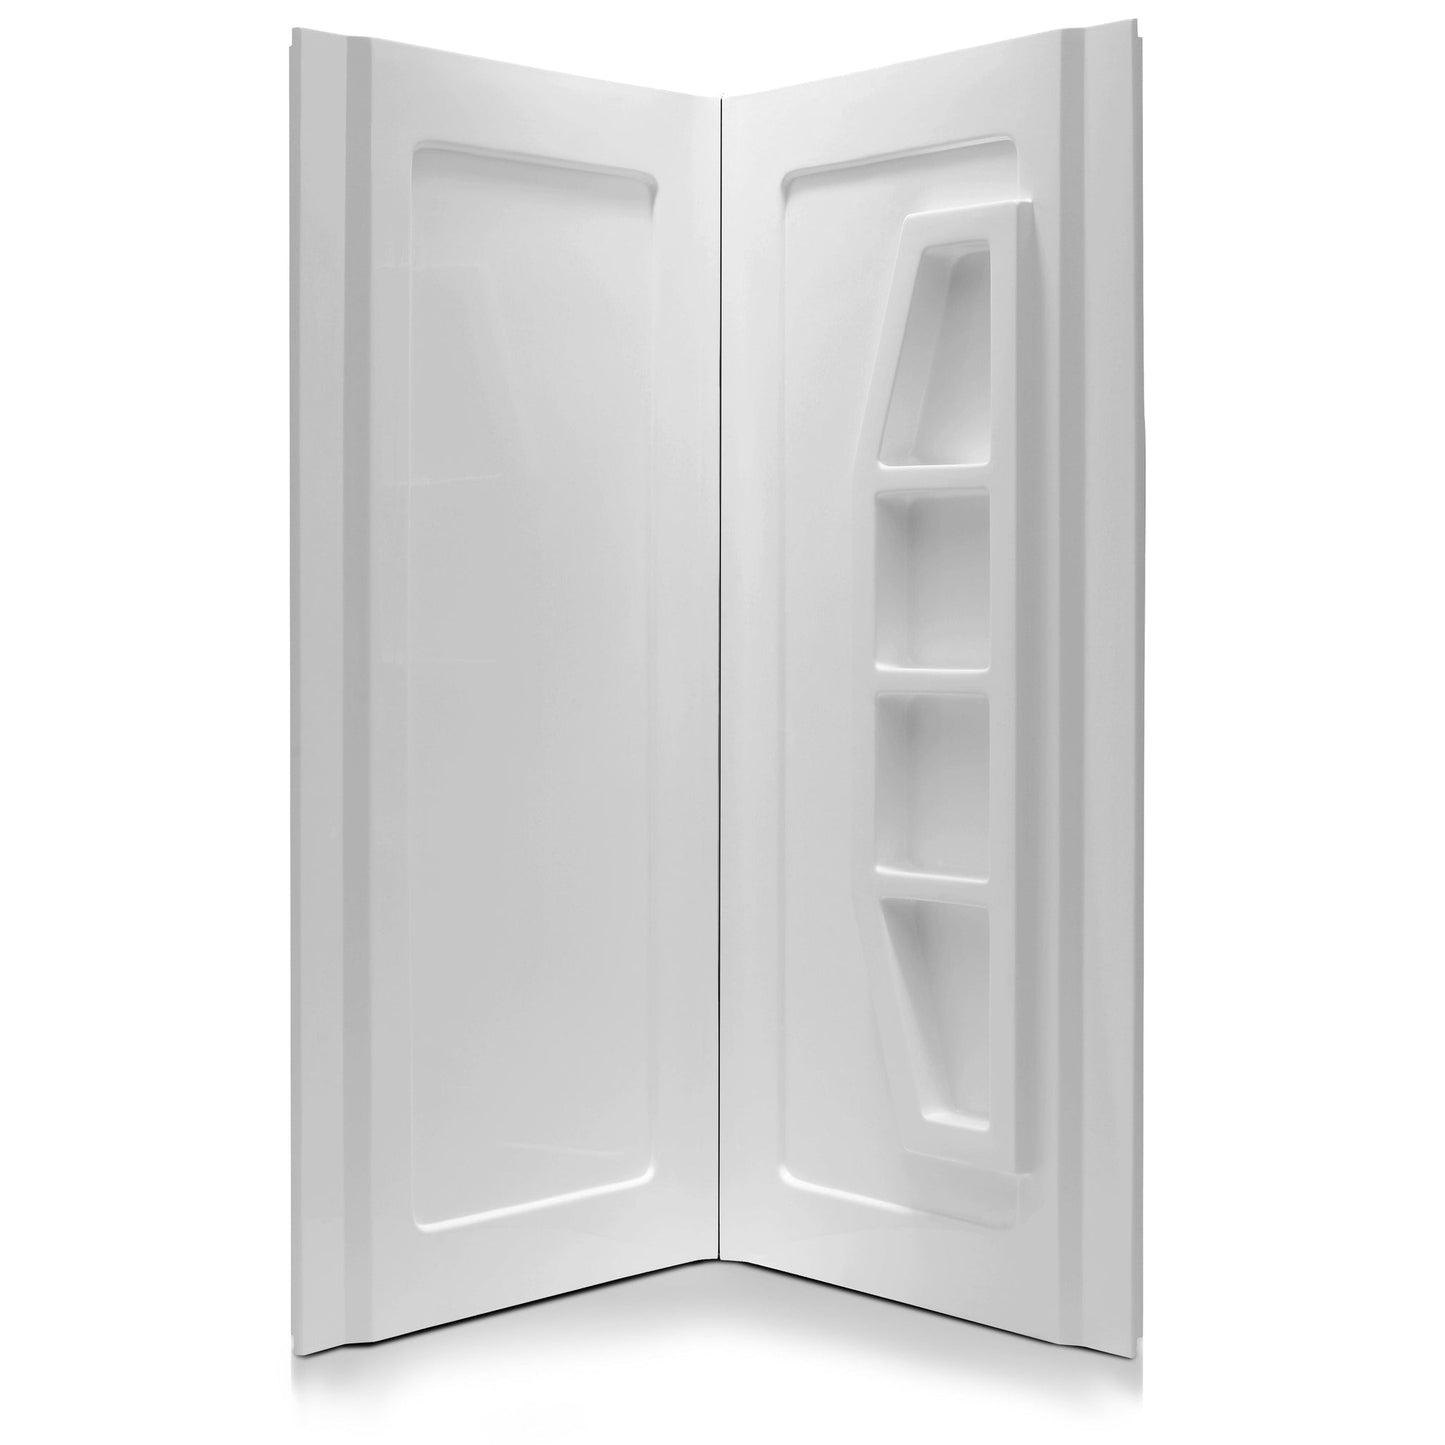 ANZZI Gradient Series 36" x 36" x 74" White Acrylic Corner Two Piece Shower Wall System With 4 Built-in Shelves